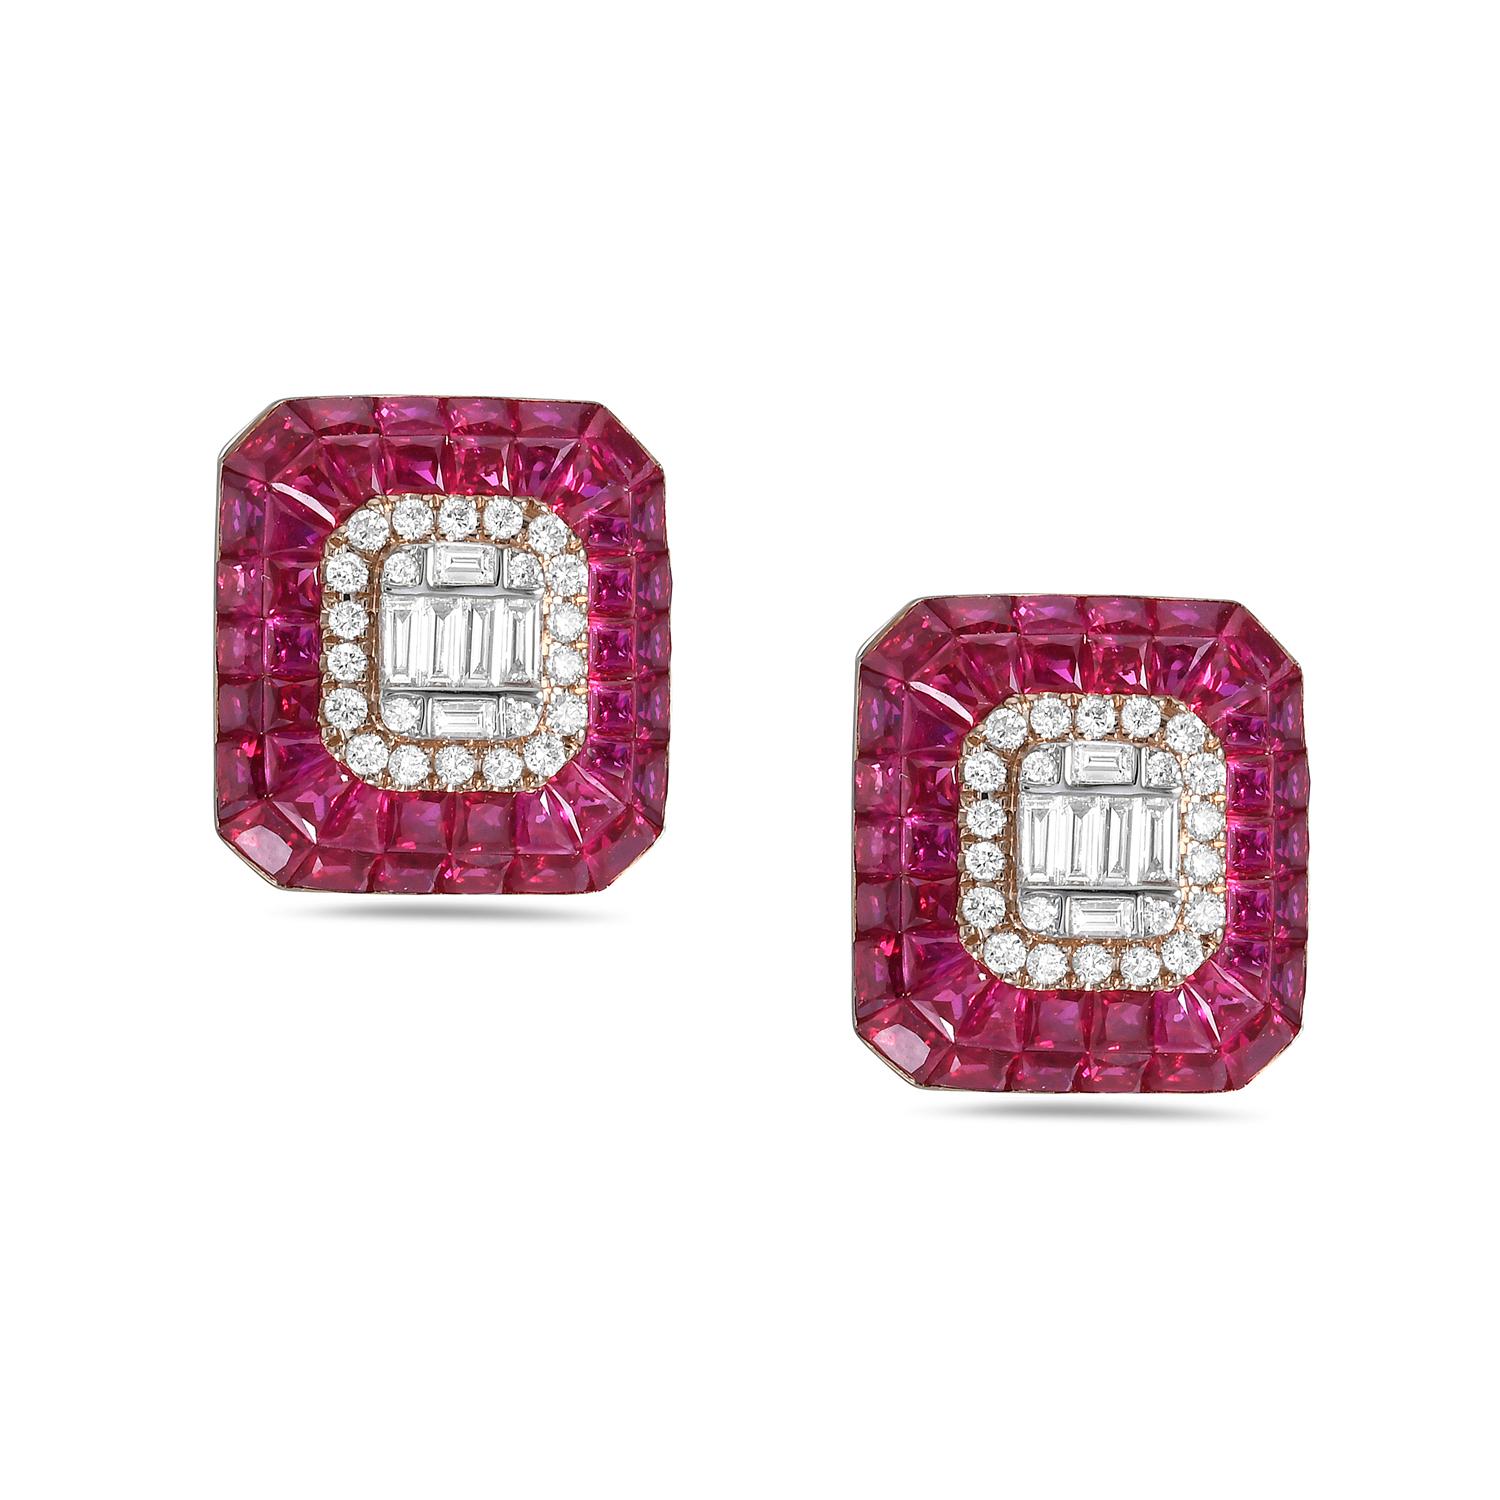 Mixed Cut 6.24 ct Ruby & Diamonds Studs Made In 18k Gold For Sale